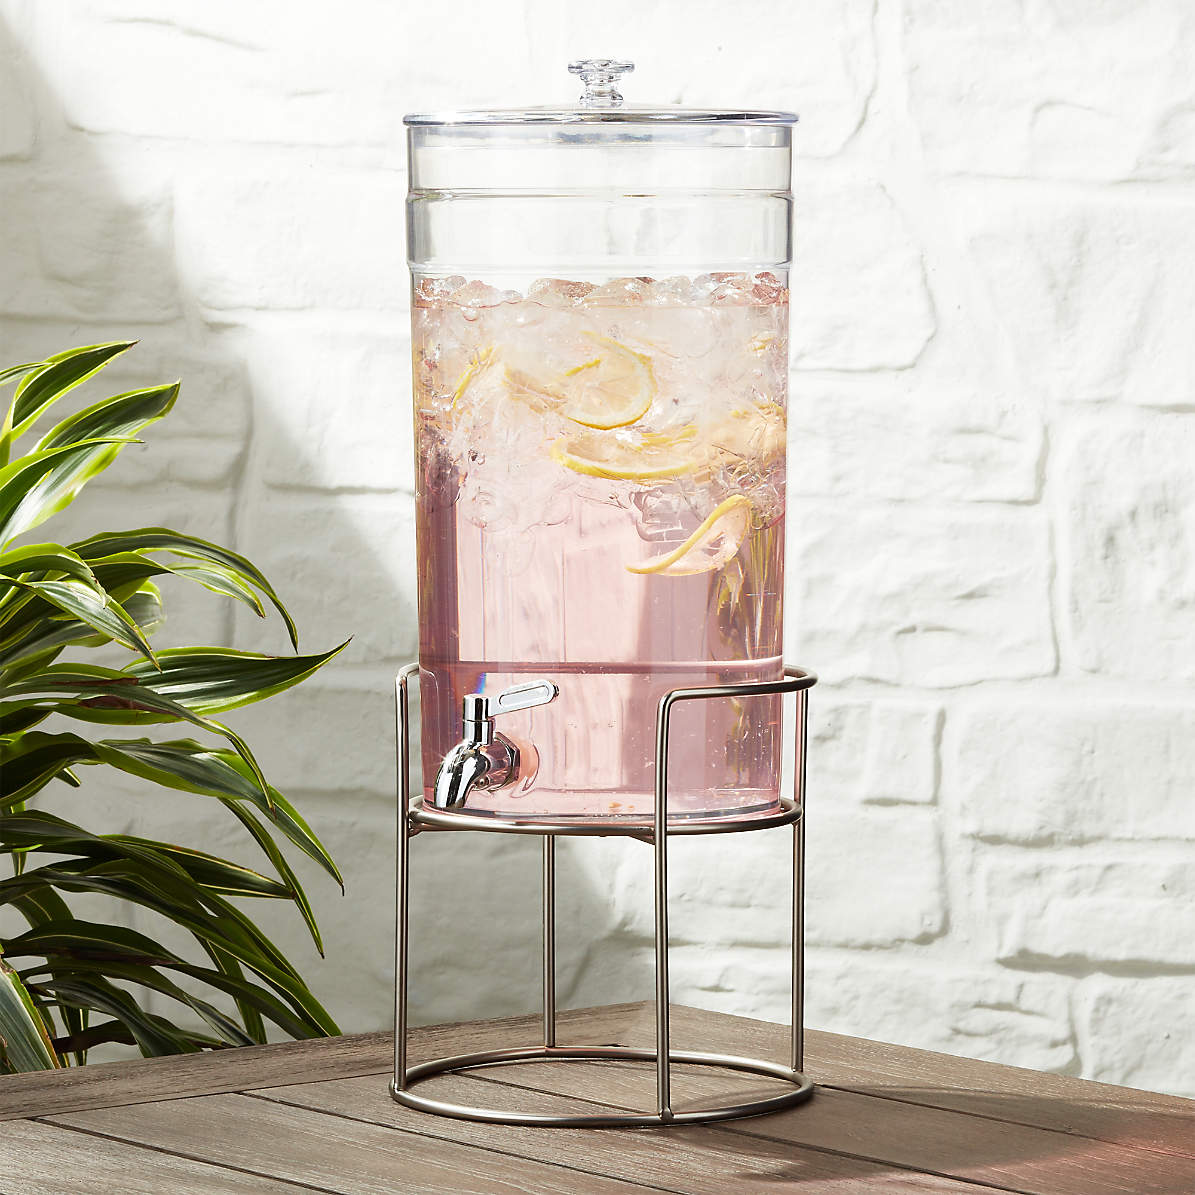 https://cb.scene7.com/is/image/Crate/ClaroAcrylDrkDspWSlvStndSHS19/$web_pdp_main_carousel_zoom_med$/190411134925/claro-acrylic-drink-dispenser-with-silver-stand.jpg